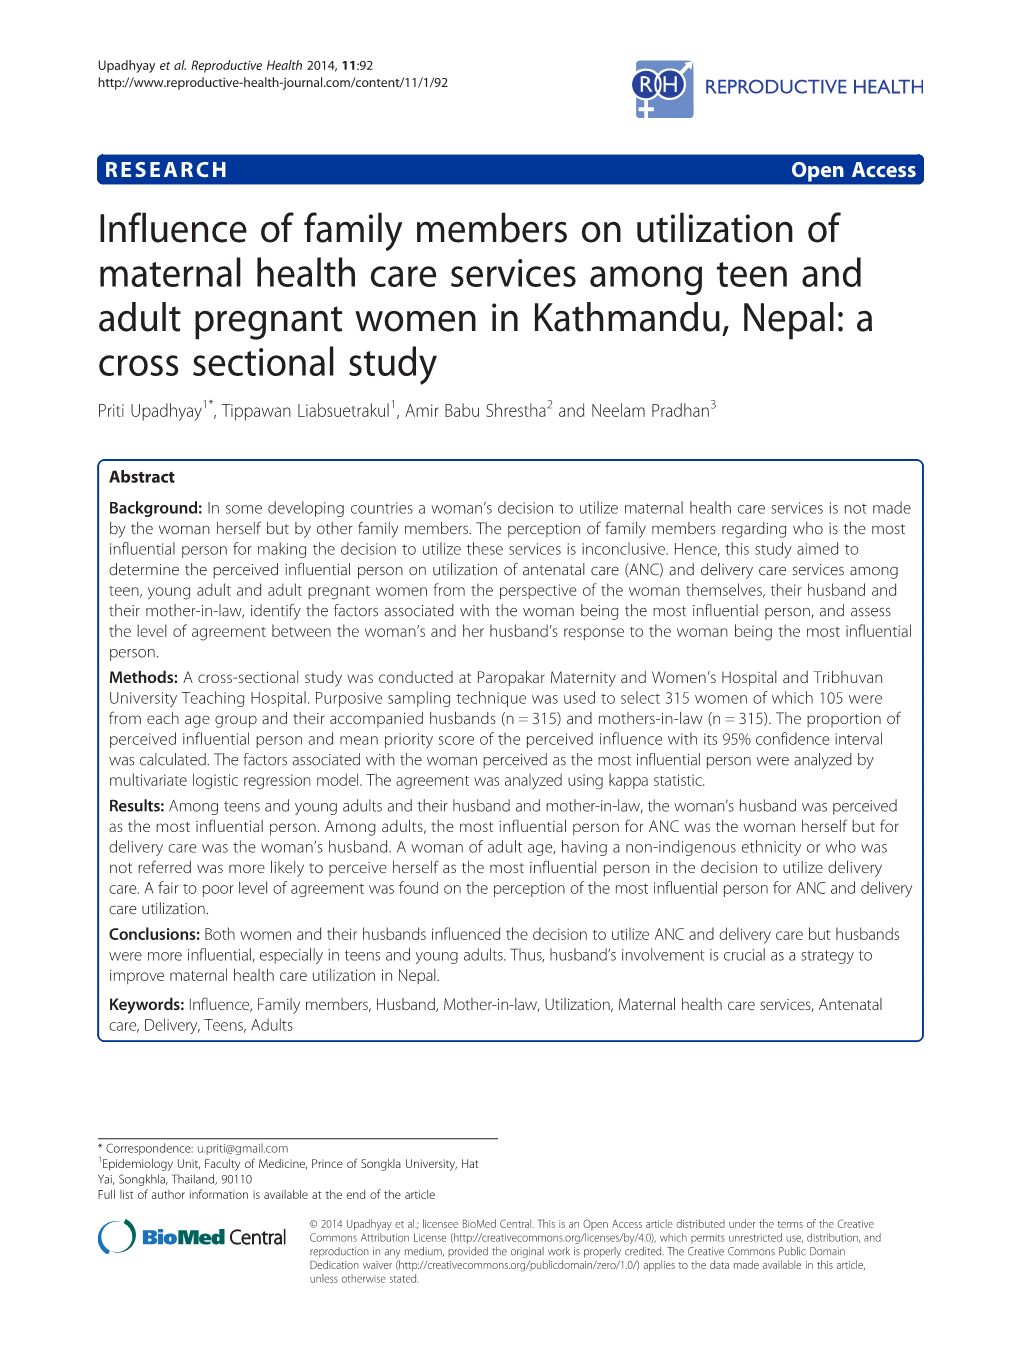 Influence of Family Members on Utilization of Maternal Health Care